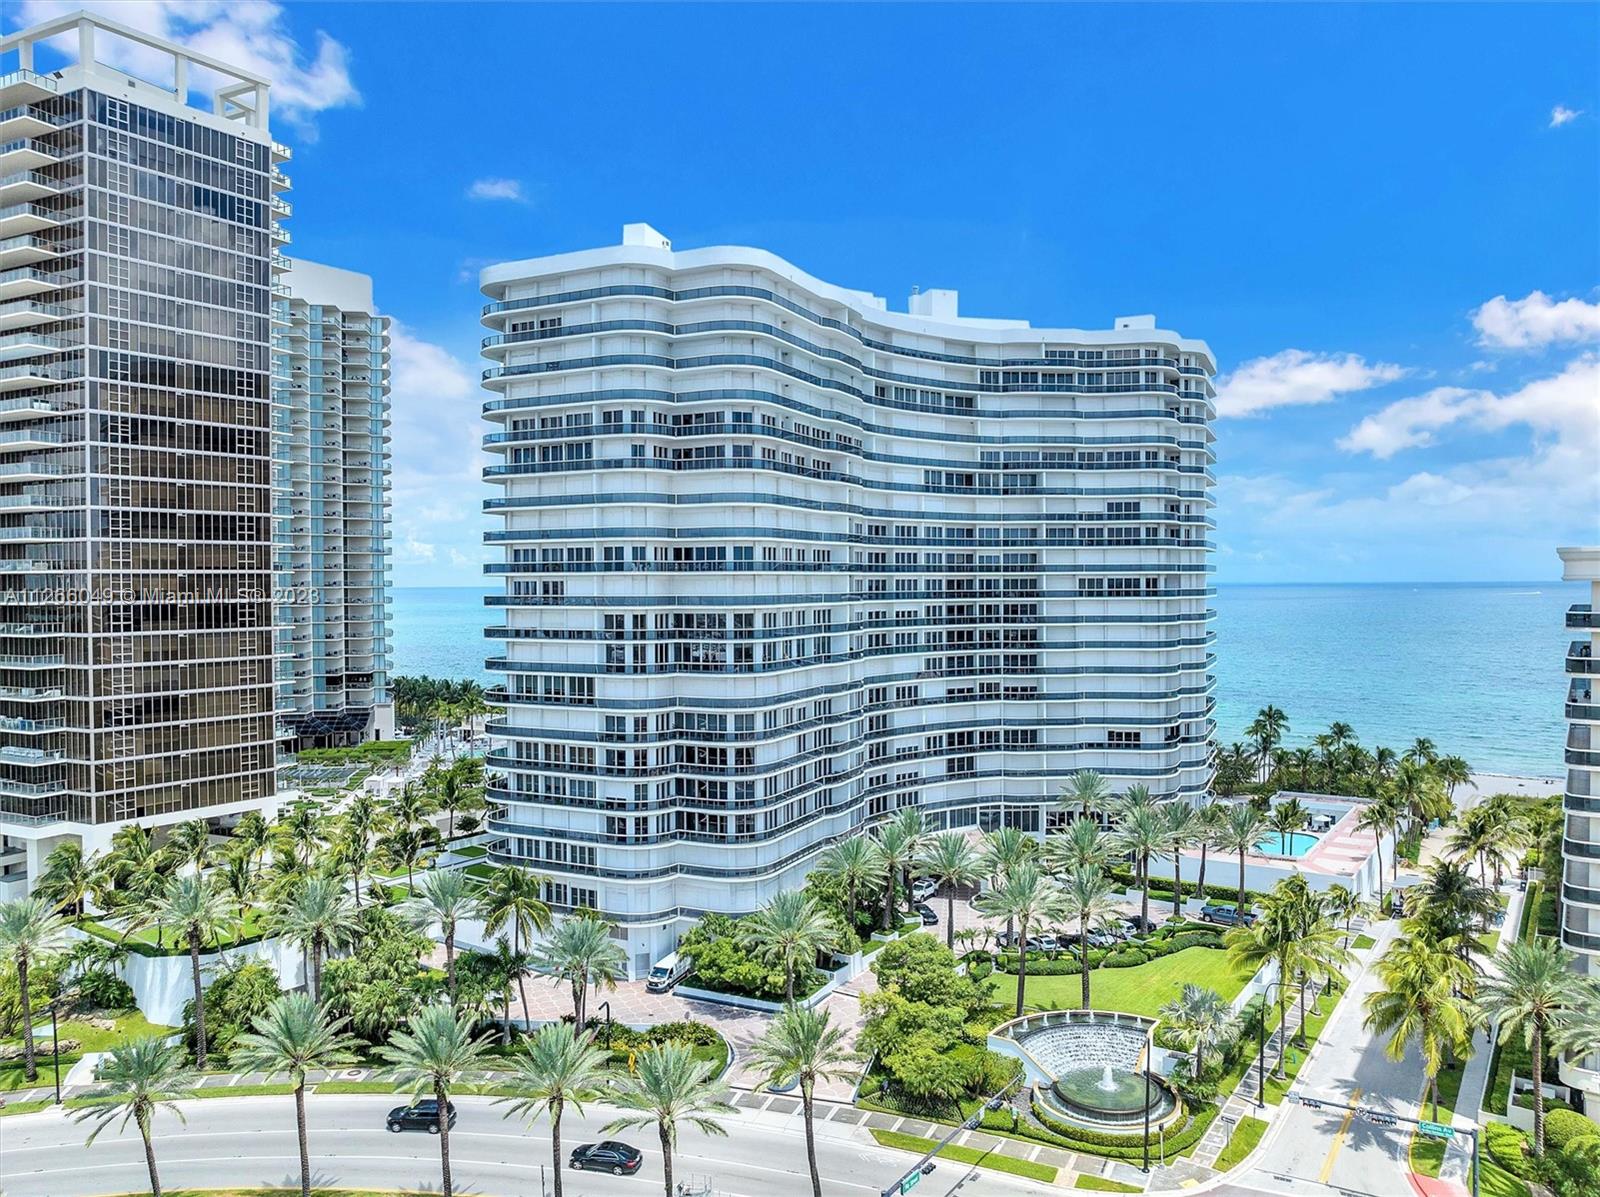 WOW! Private elevator opens to breathtaking 180 degree views from floor to ceiling hurricane  windows and wrap around balcony Ultra luxury oceanfront building located in village of Bal Harbor.Across from the exclusive Bal Harbor shops with fine dining and designer shops. Walk to awe-Inspiring houses of worship. Heart-stopping excruciating attention to detail in this expansive 3 bed+den 3.5 bath masterpiece with imported designer features & unique finishes. Feast your eyes on the spectacular open kitchen with marble counters and new Viking appliances. Plus new porcelain floors, standing tub in the spacious master bathroom,custom built closet, motorized shades & hi-tech washer dryer. Highly amenitized complex with full service concierge, valet, security, gym/spa, restaurant & tennis club++--